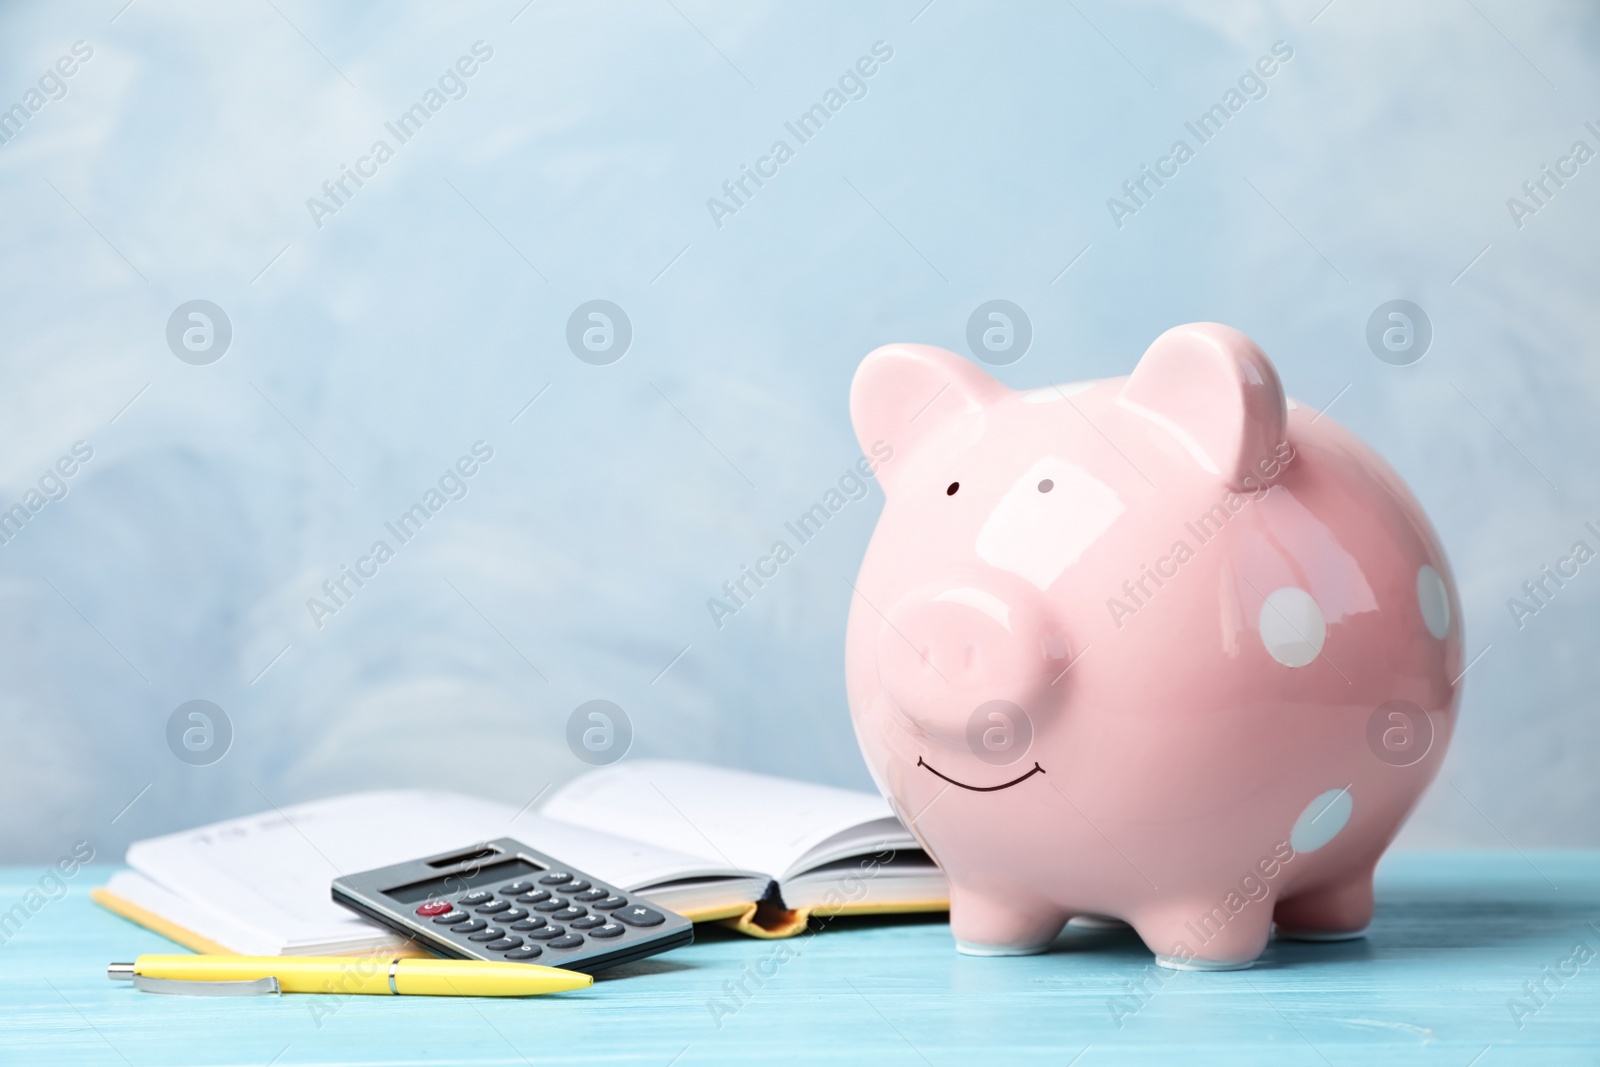 Photo of Piggy bank with calculator and notebook on table. Space for text